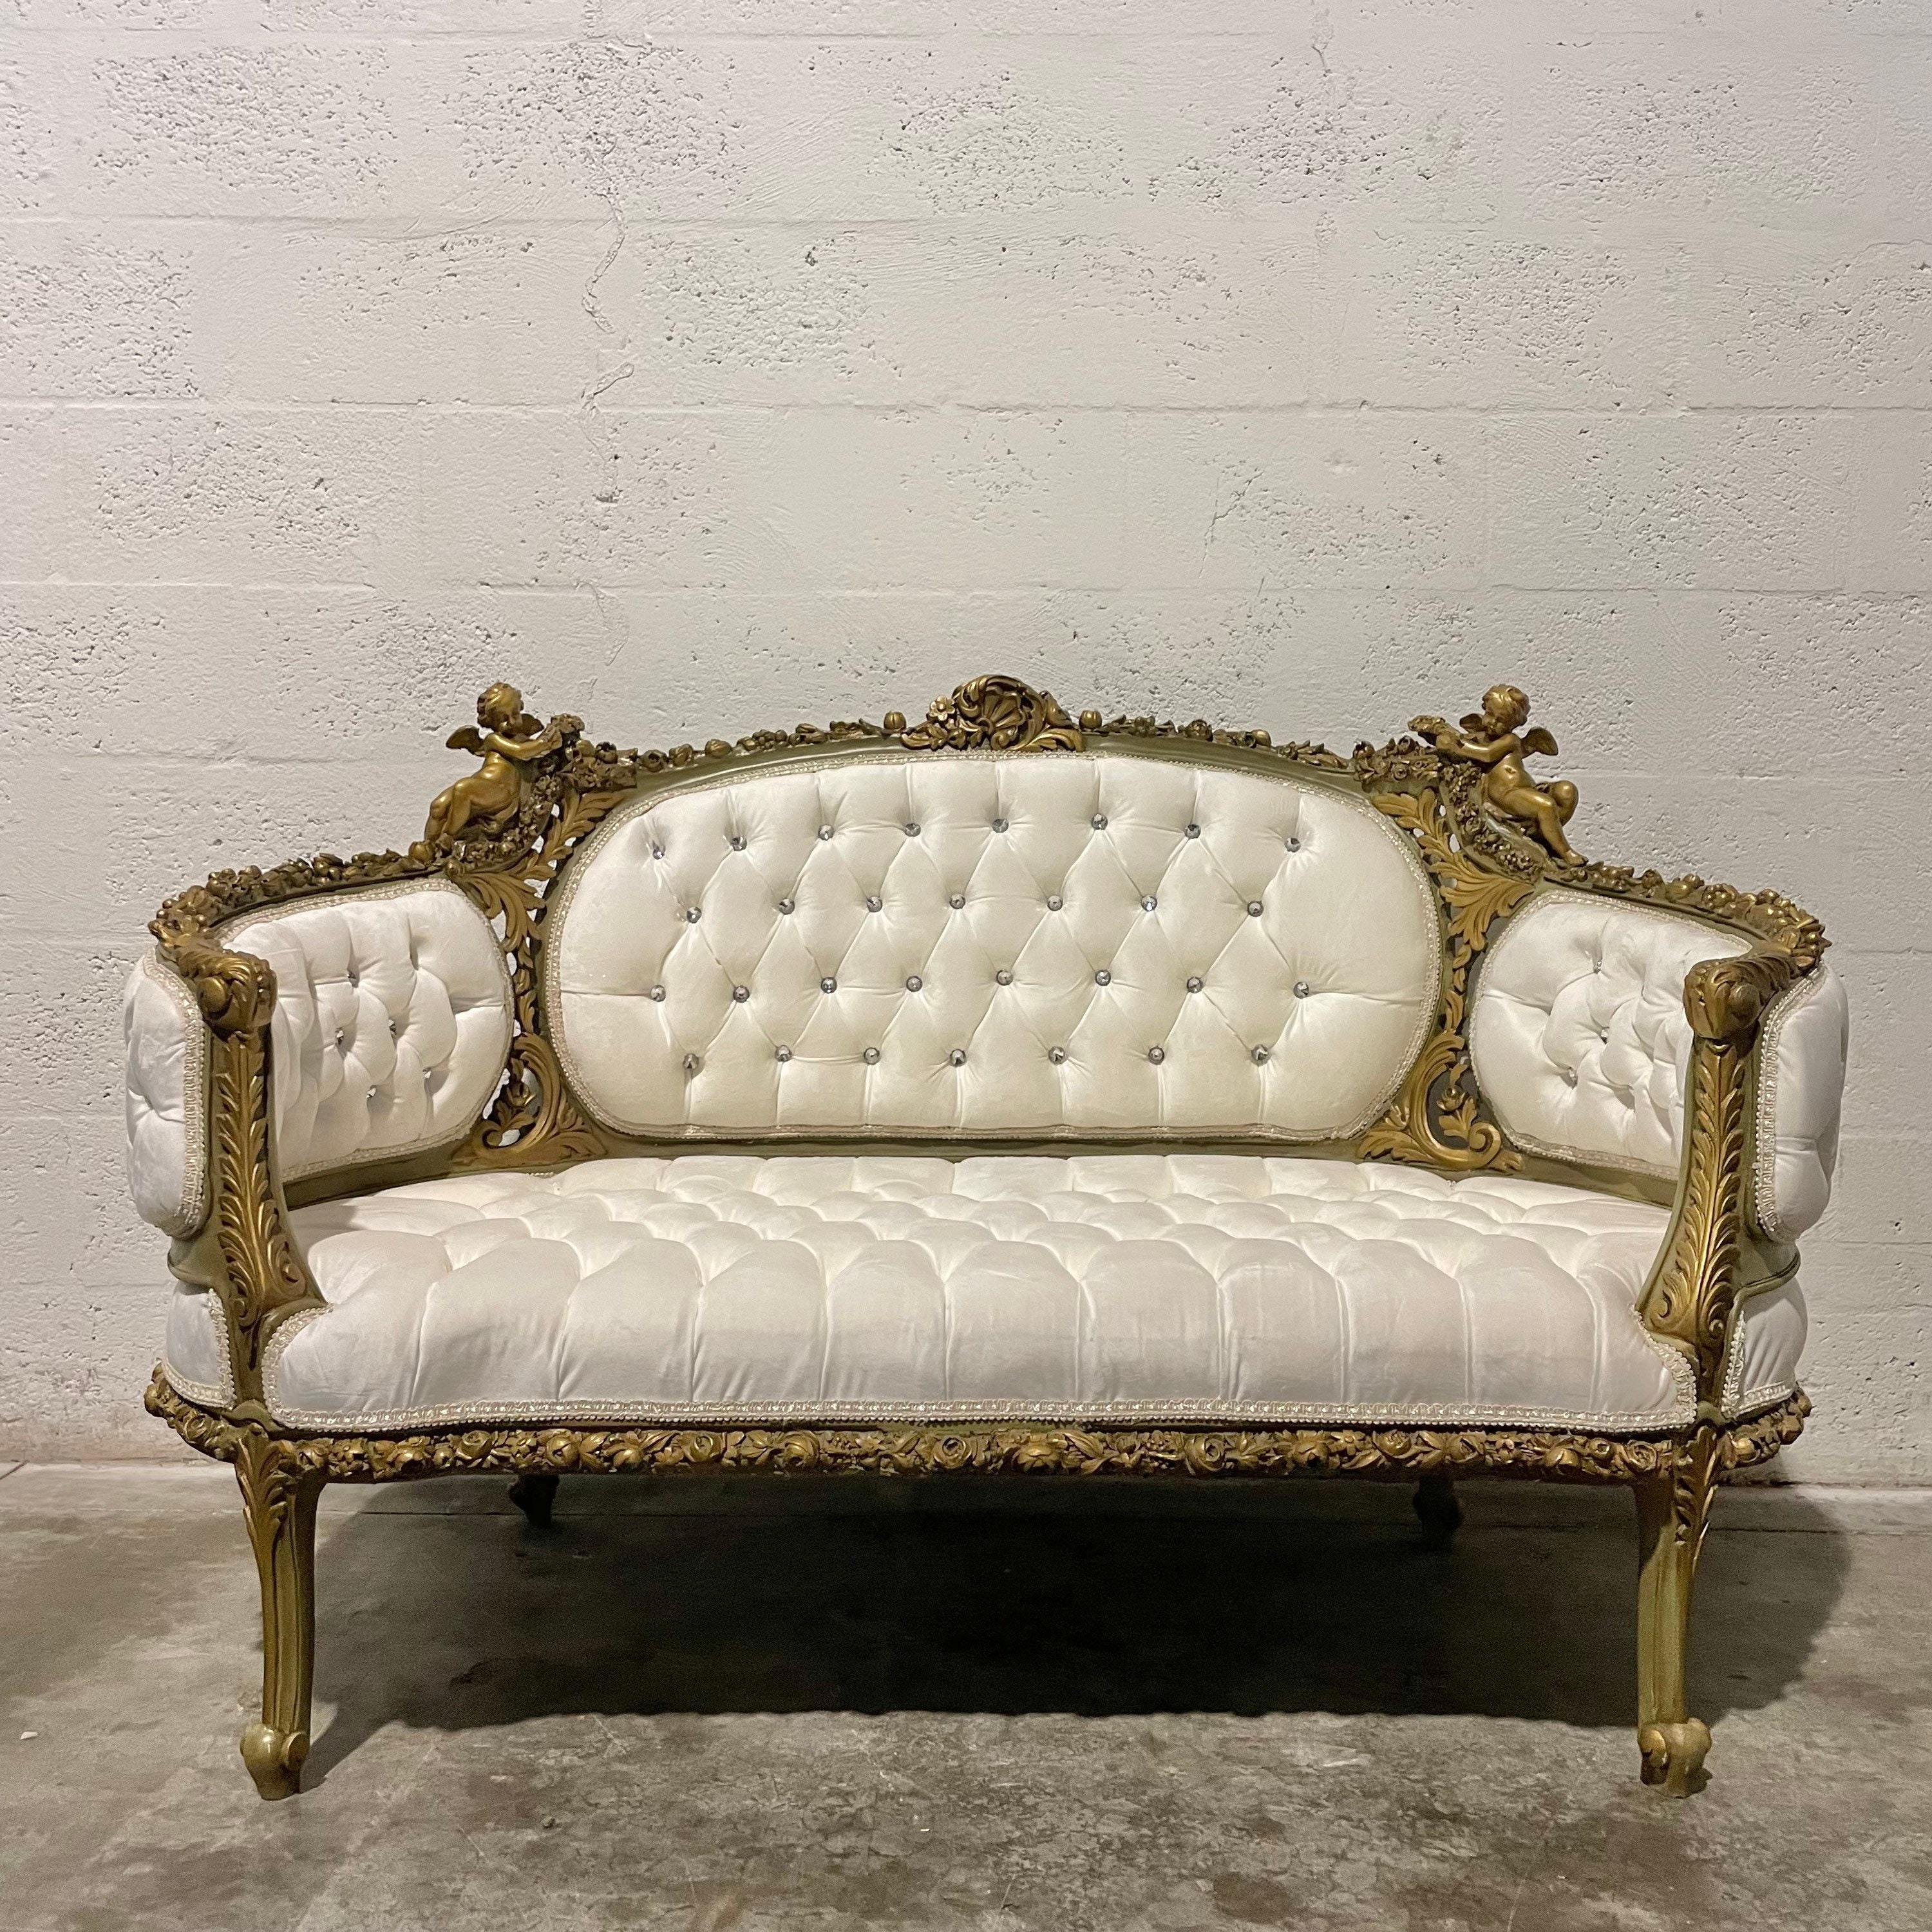 Parlor Set, Settee, Chairs, Two Louis XV Style Three-Piece Gilt